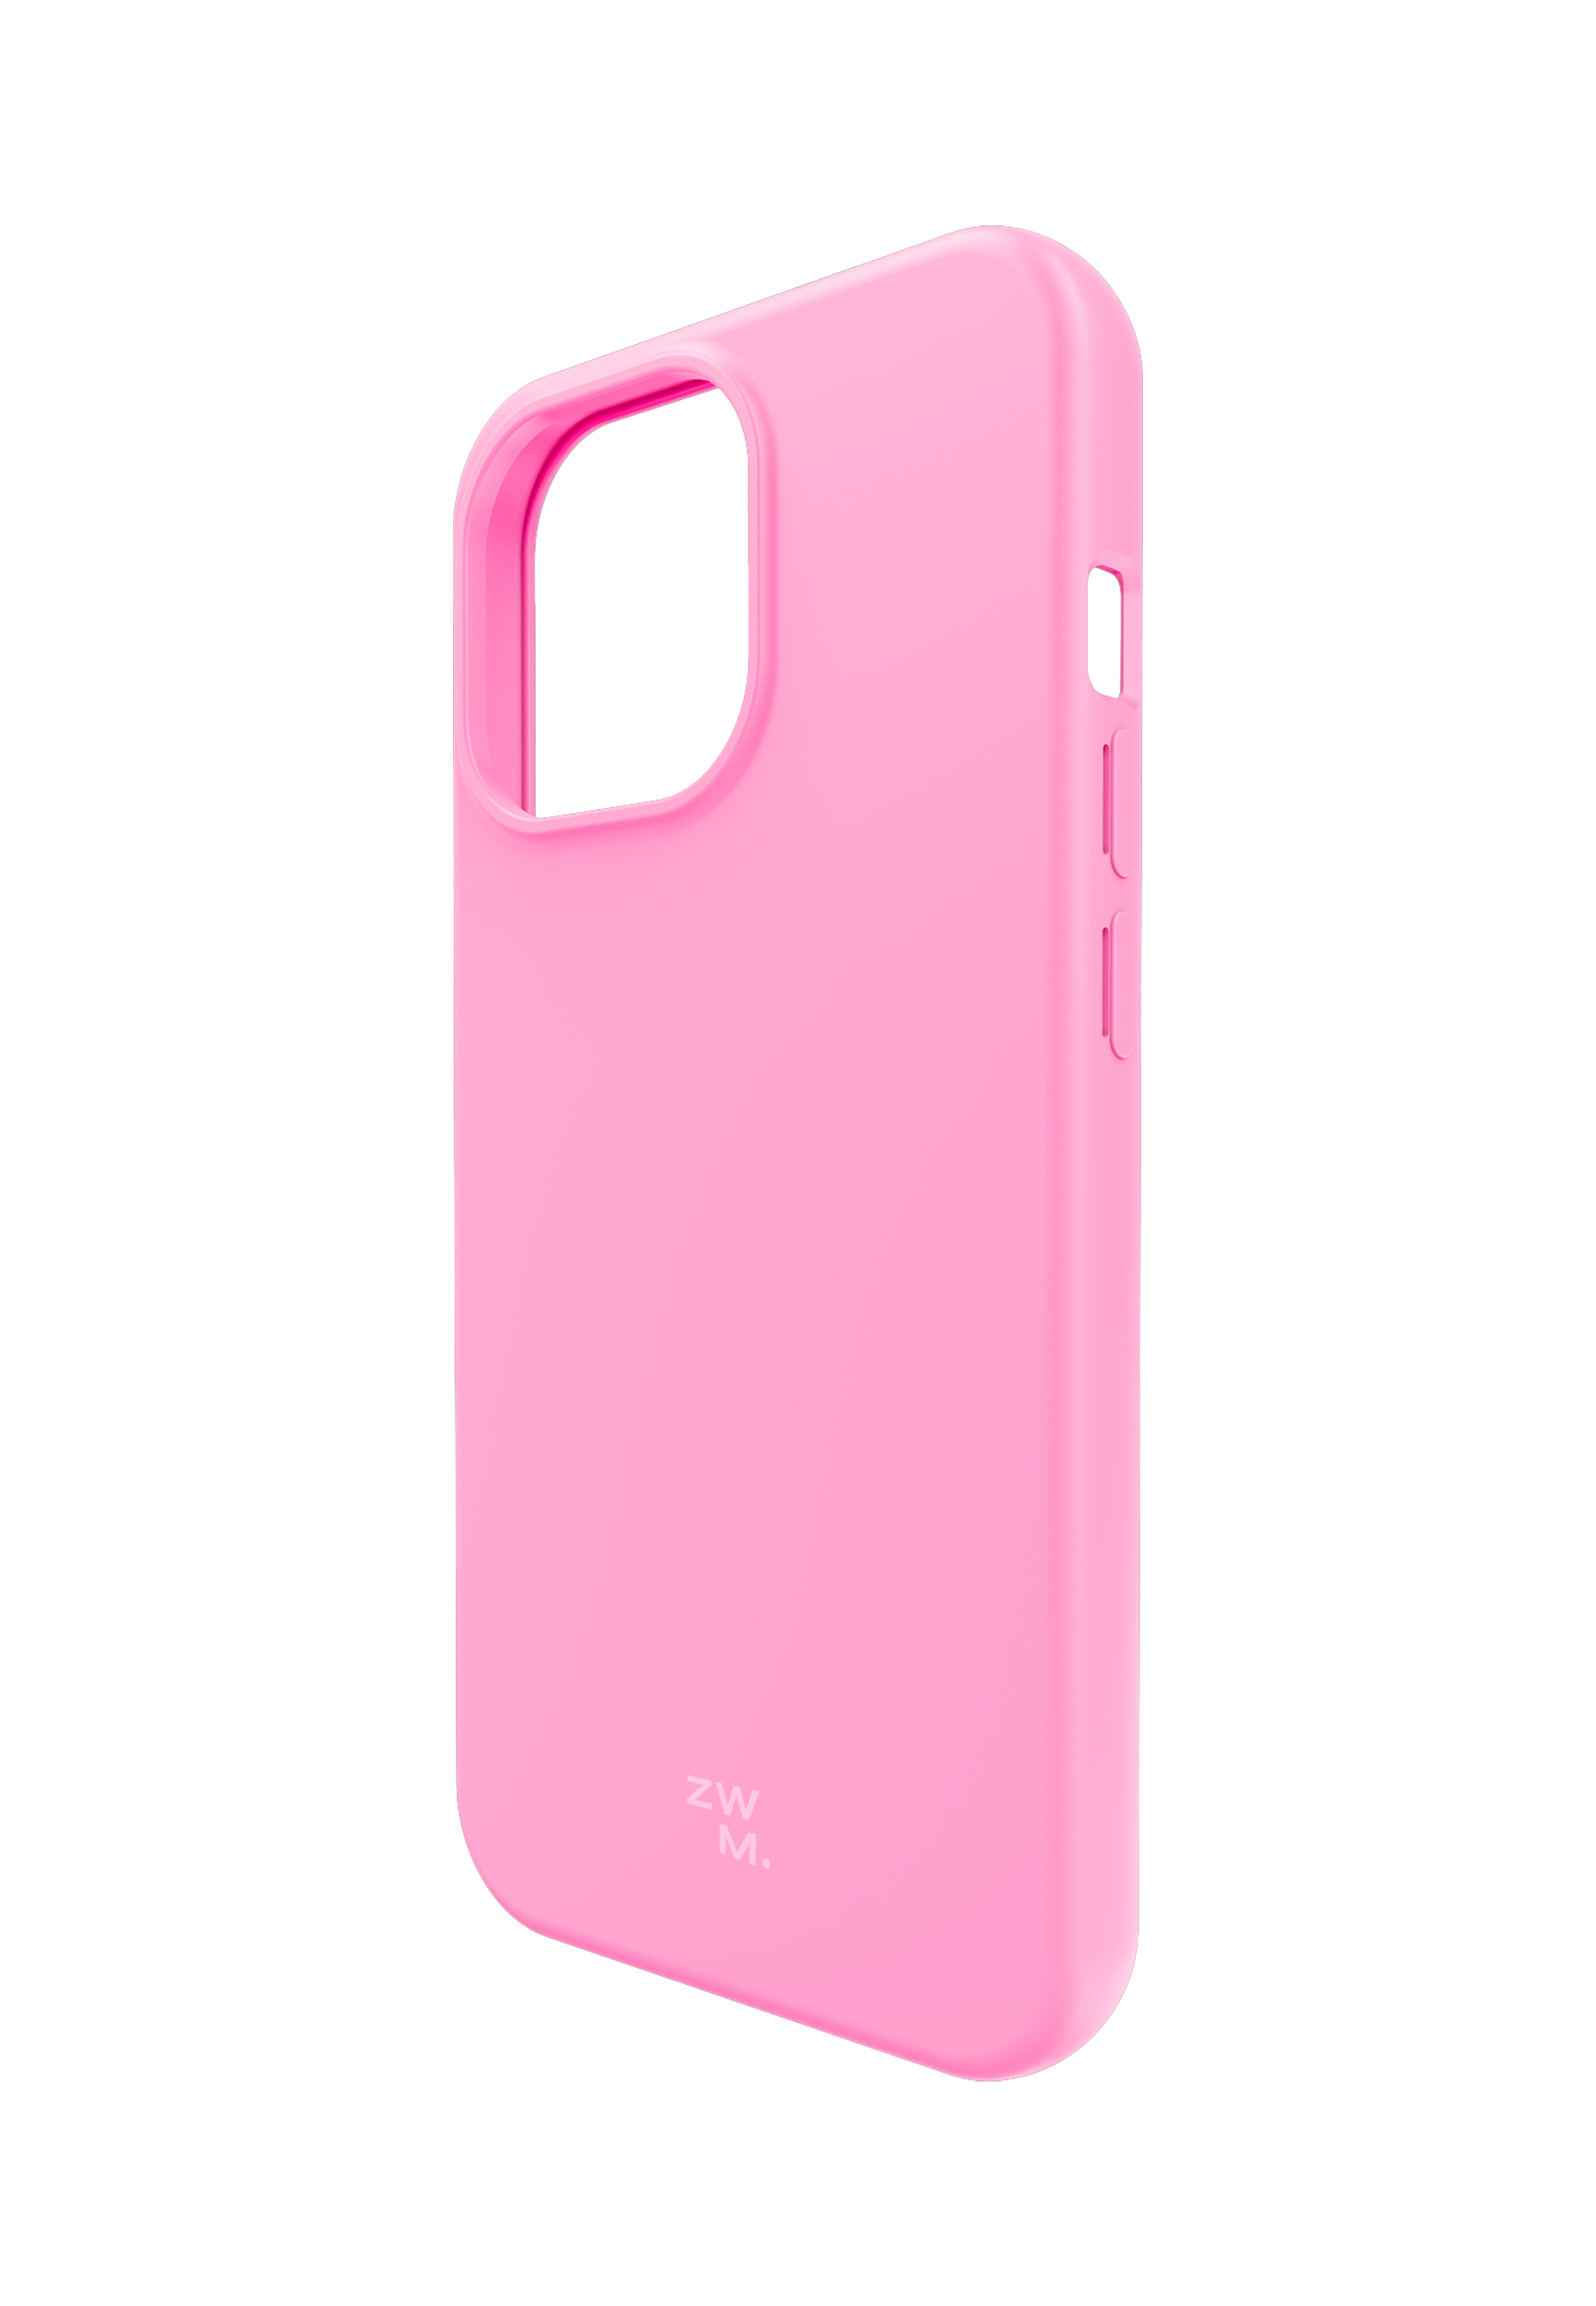 iPhone Backcover, 12/12 _13PM, ZWM Apple, pink Pro,